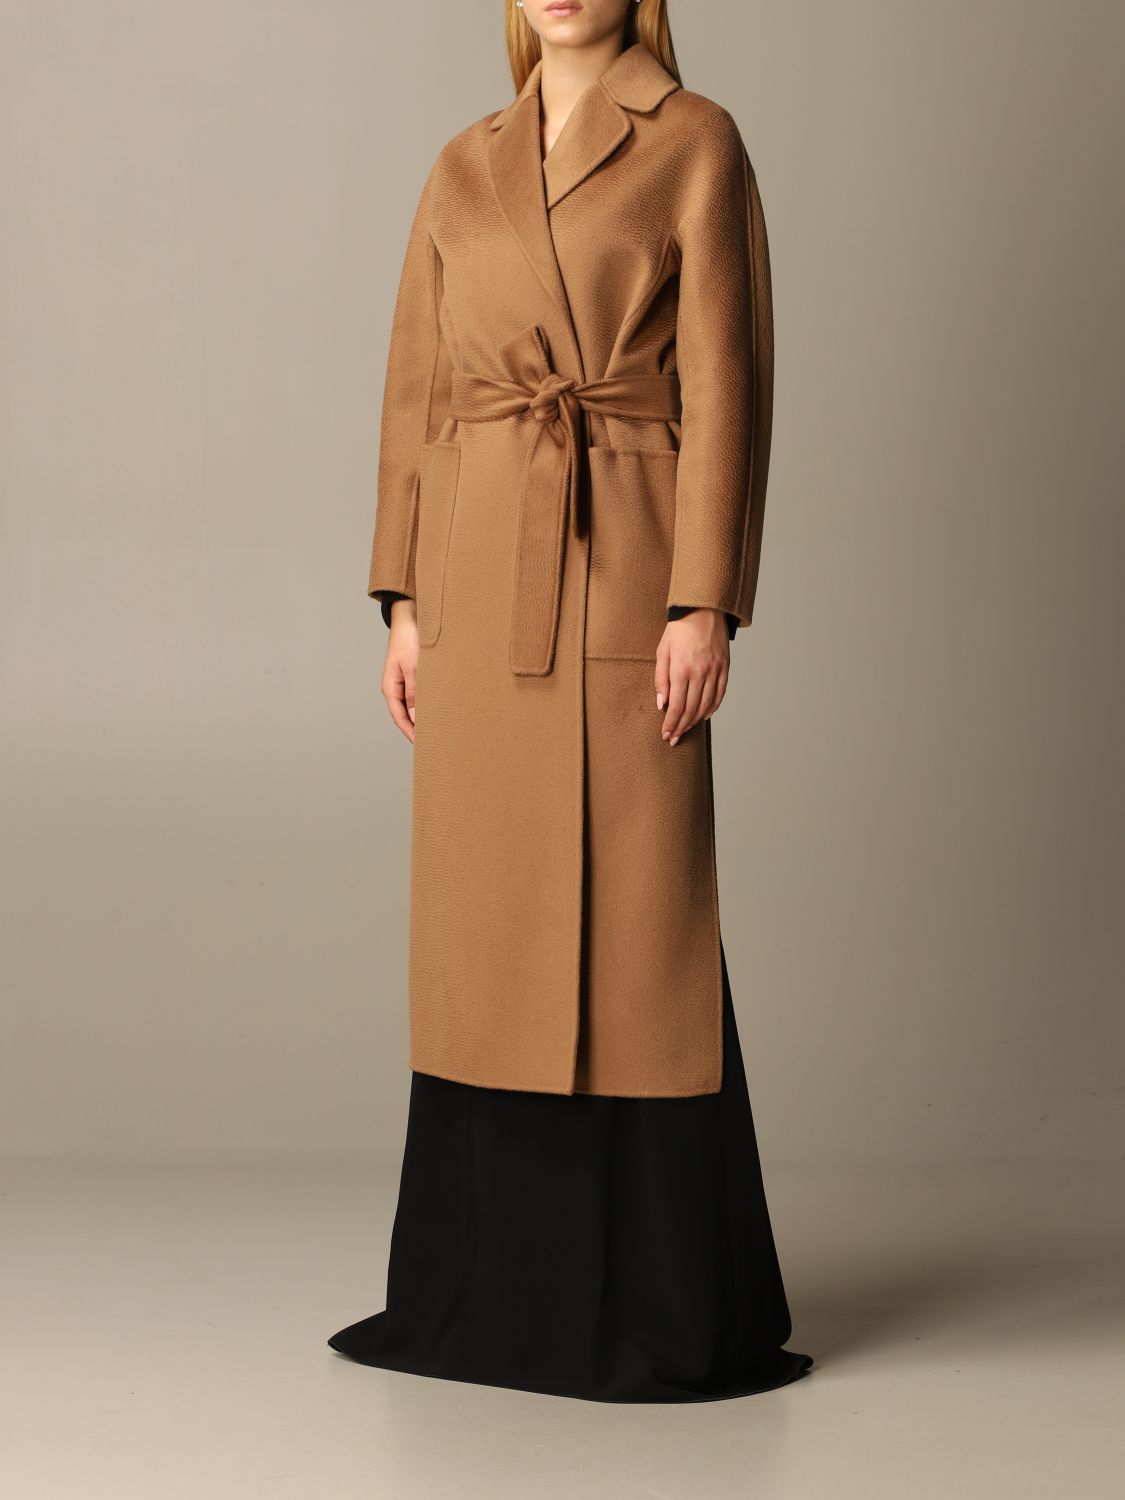 S MAX MARA: Amore coat in virgin wool and cashmere - Camel | Coat S Max ...